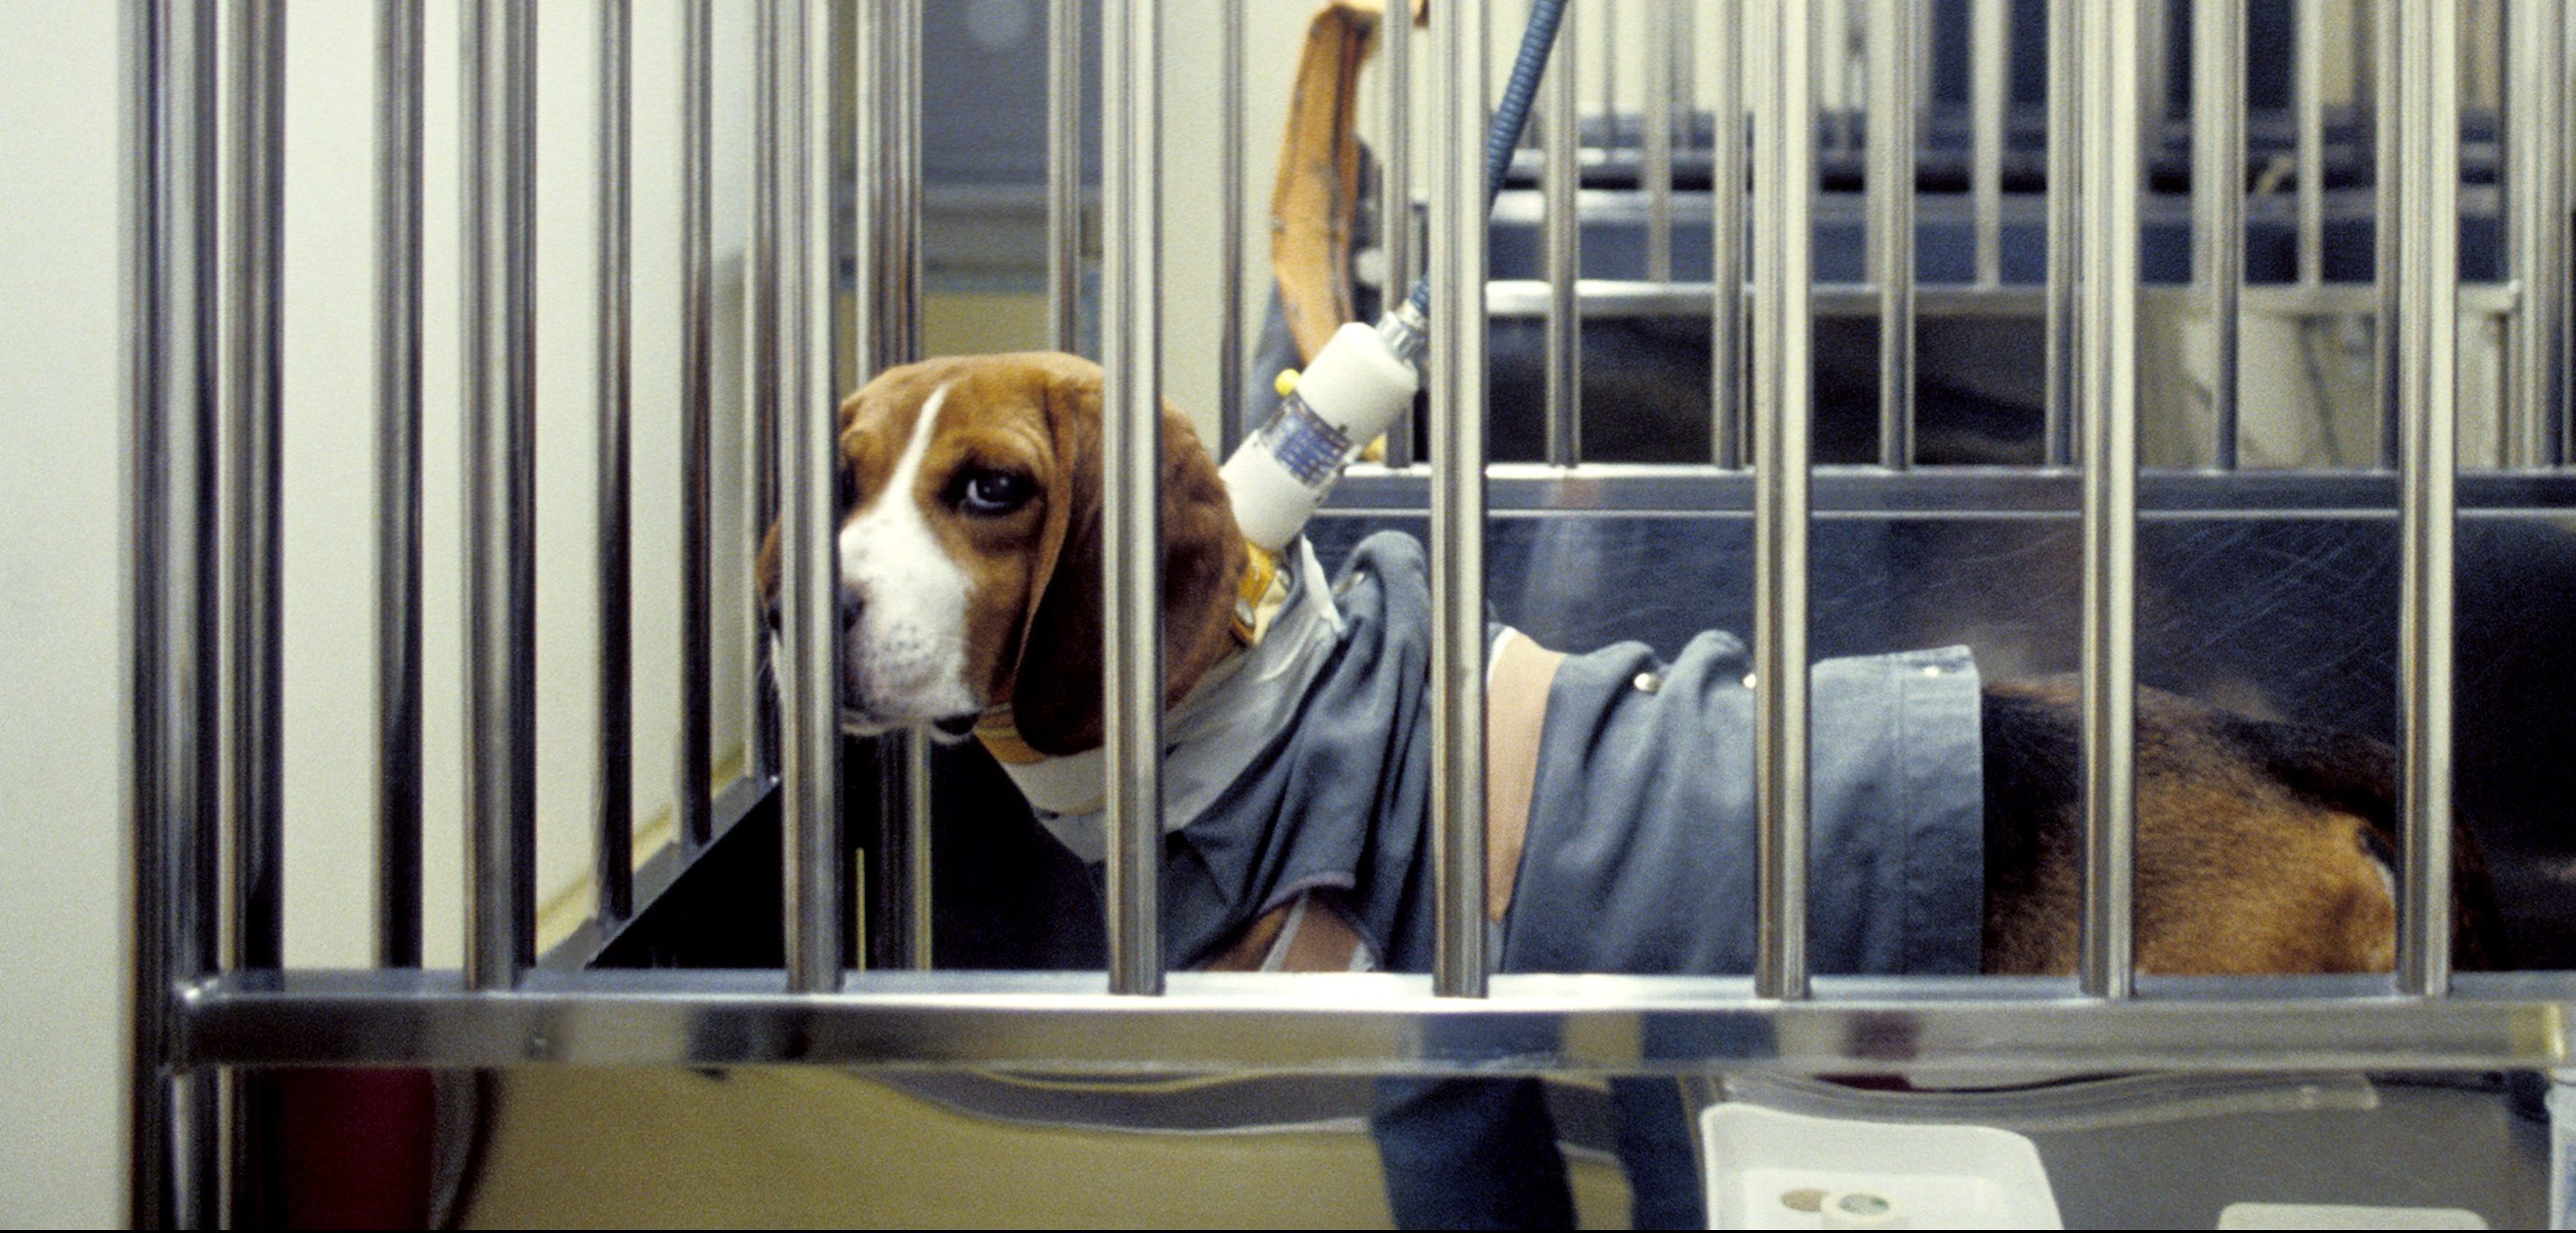 biomedical research for animal testing